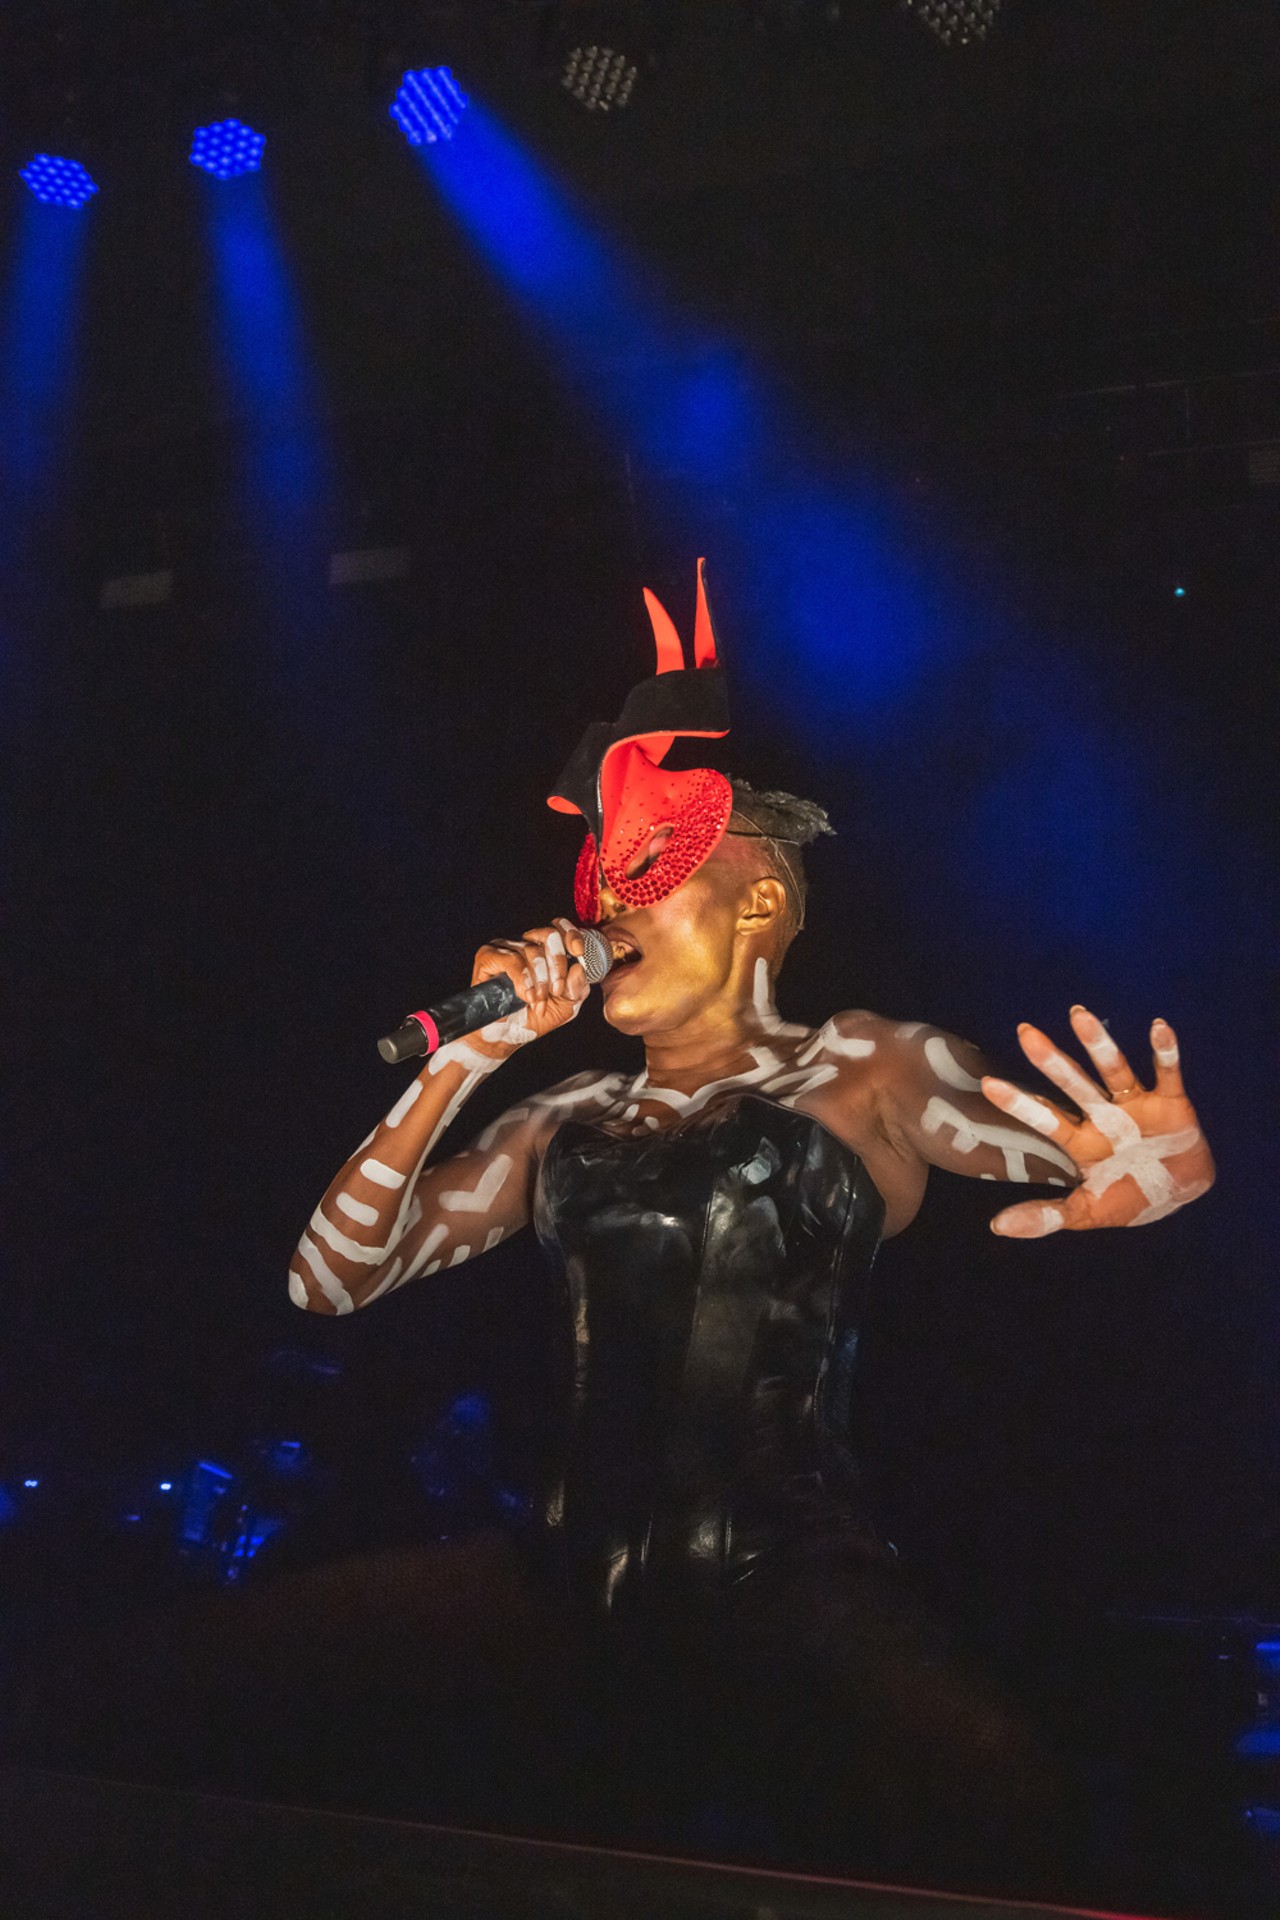 All the fierce looks served at Grace Jones' show at Detroit's Masonic Temple